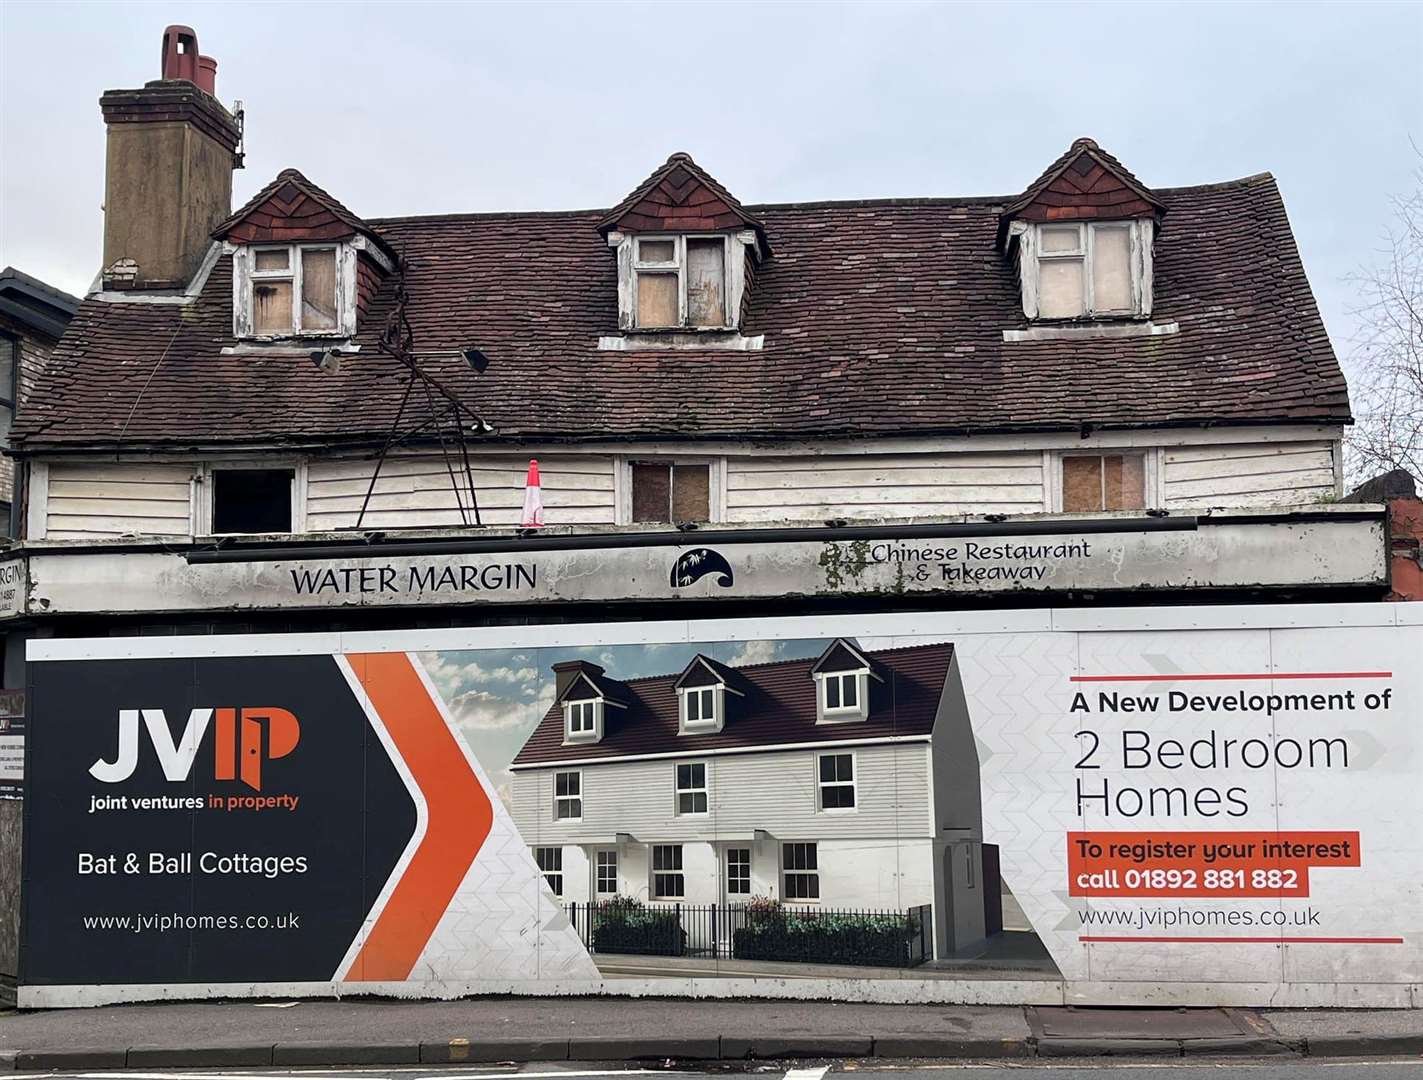 JVIP hoardings showing former plans to turn the pub into cottages. Picture: Southborough Society